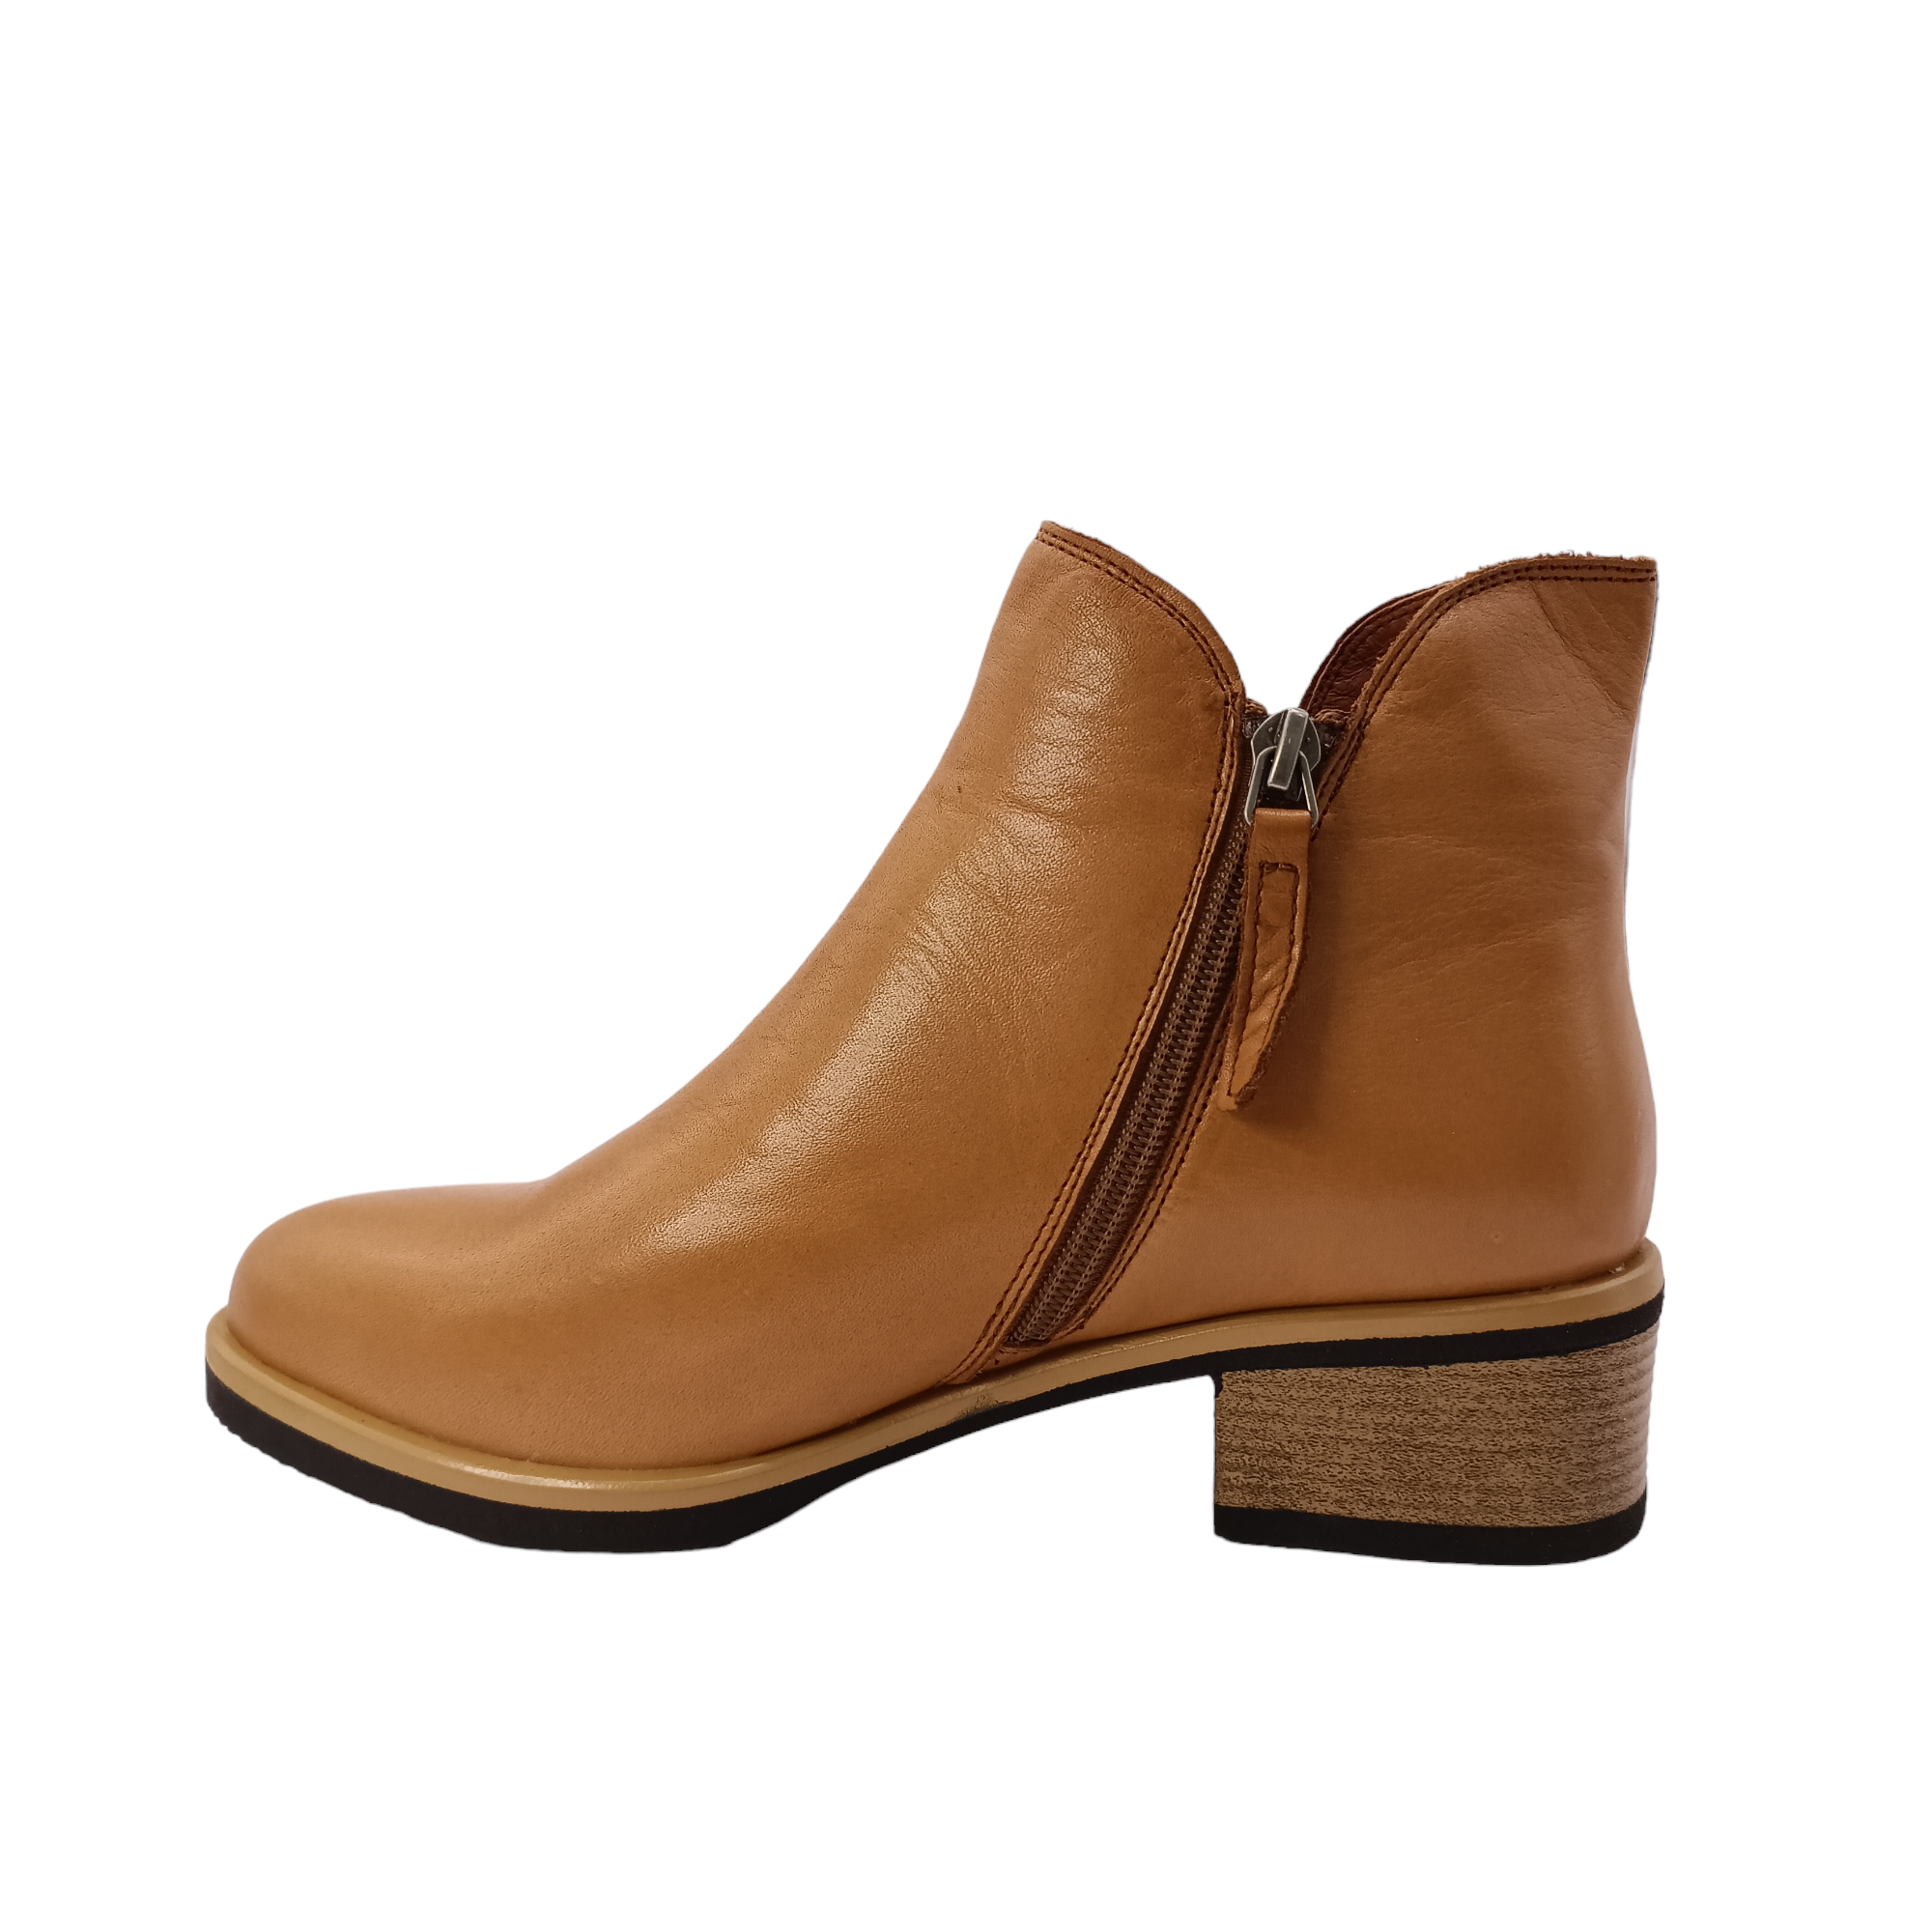 Shop Dolomite - with shoe&amp;me - from Bresley - Boots - Boot, Winter, Womens - [collection]